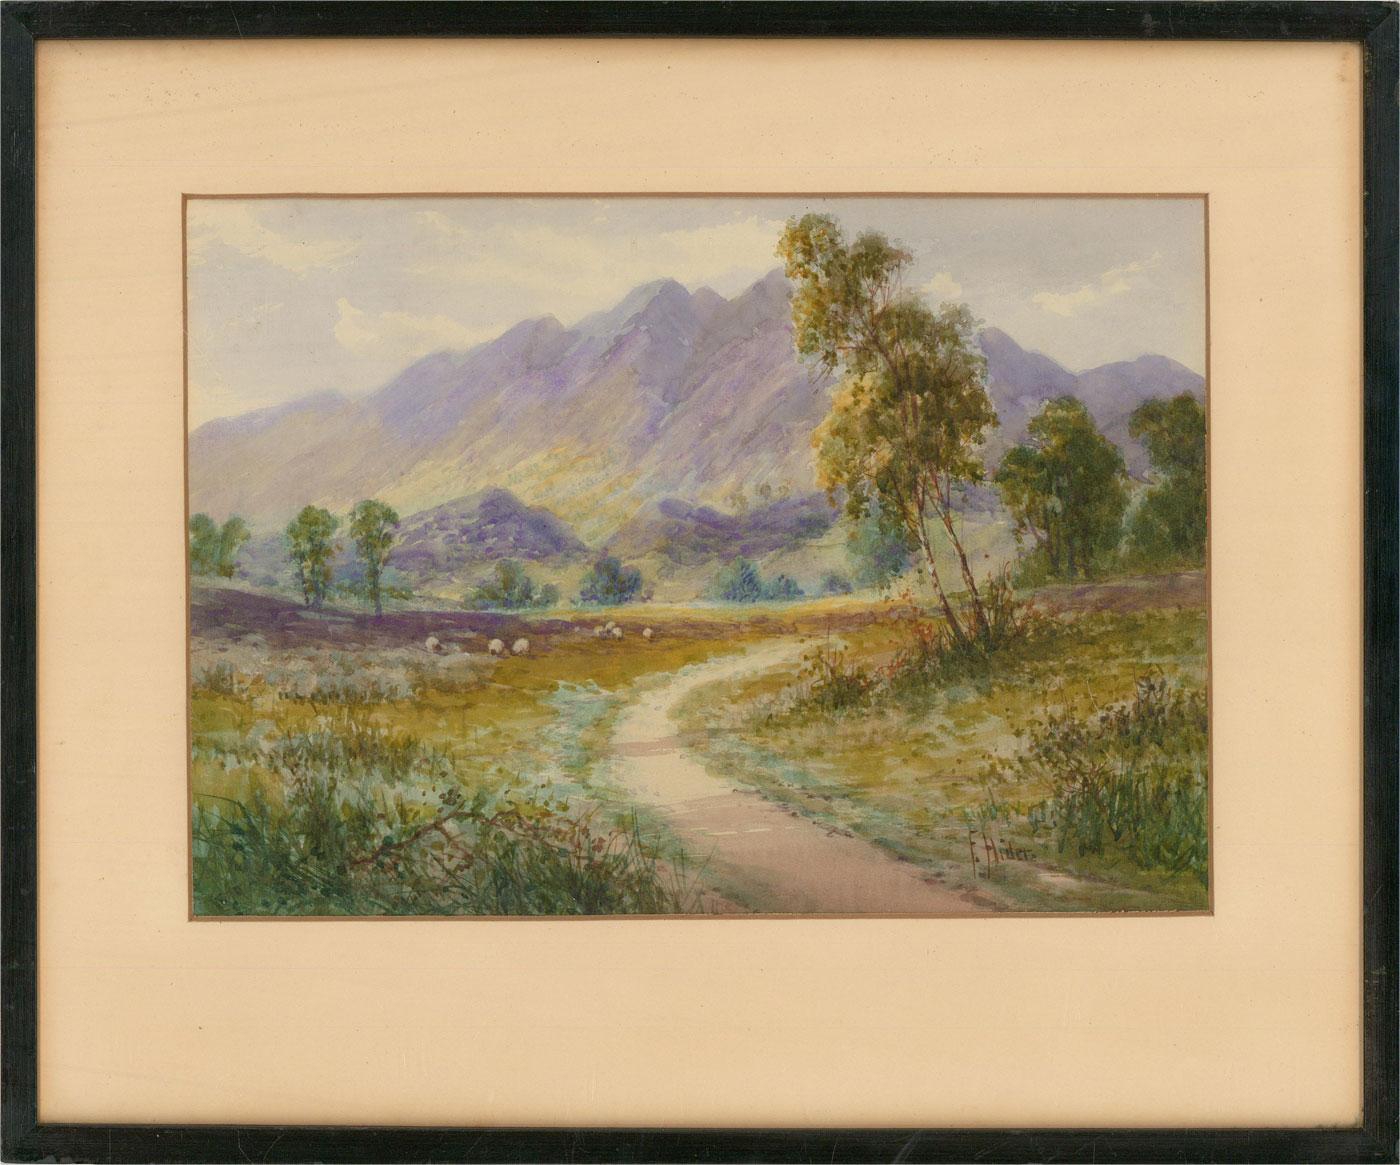 A mountainous landscape with a path winding into the distance and a flock of sheep grazing to the left-hand side. Presented glazed in a cream mount and black wooden frame. On watercolour paper.
